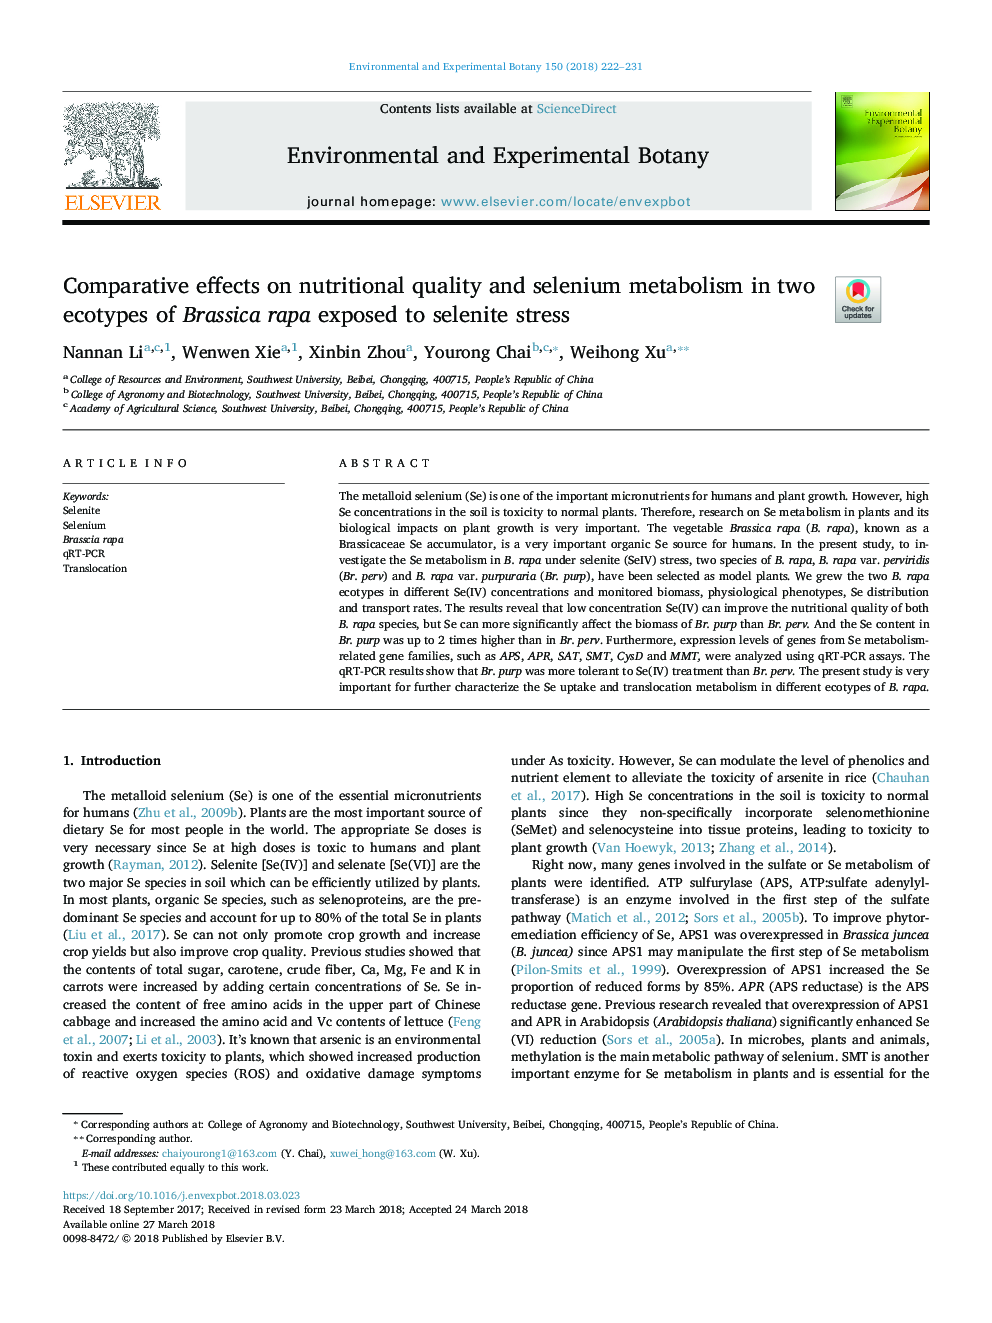 Comparative effects on nutritional quality and selenium metabolism in two ecotypes of Brassica rapa exposed to selenite stress